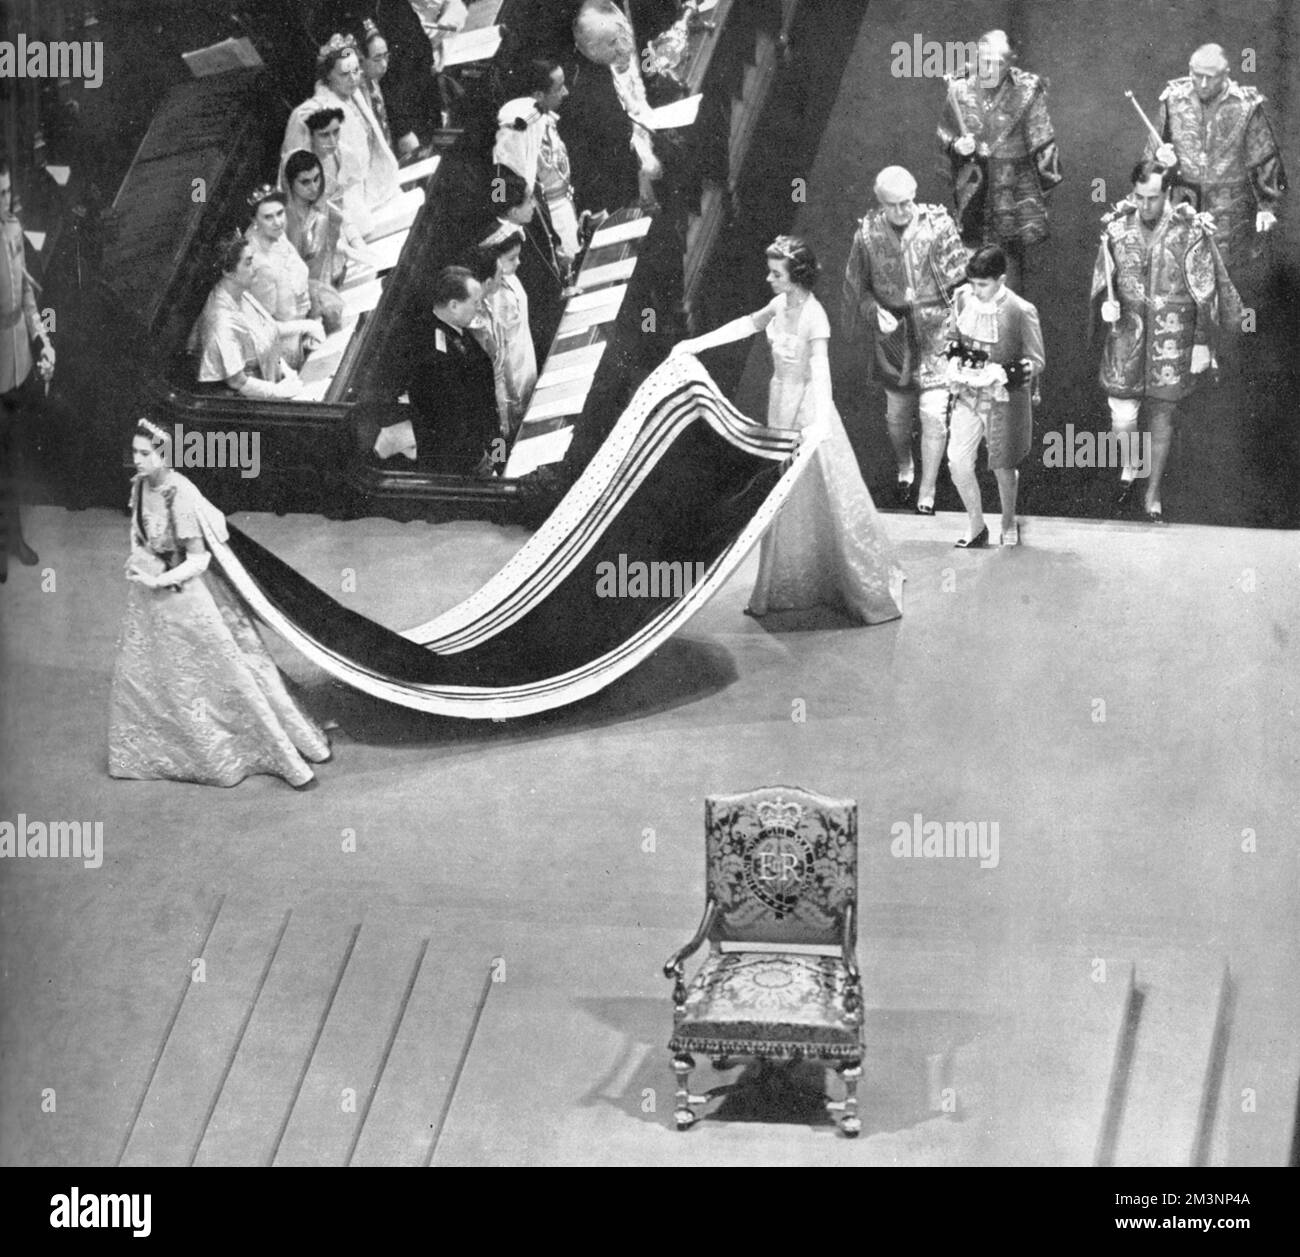 The sister of Queen Elizabeth II, Princess Margaret,  enters the Coronation Theatre in Westminster Abbey. Her train is carried by Miss Iris Peake, and she is followed by her page, Albemarle Bowes Lyon, who carries her coronet. Behind him are the Heralds of Richmond, York, Chester and Lancaster. In the foreground is the Throne.     Date: 1953 Stock Photo